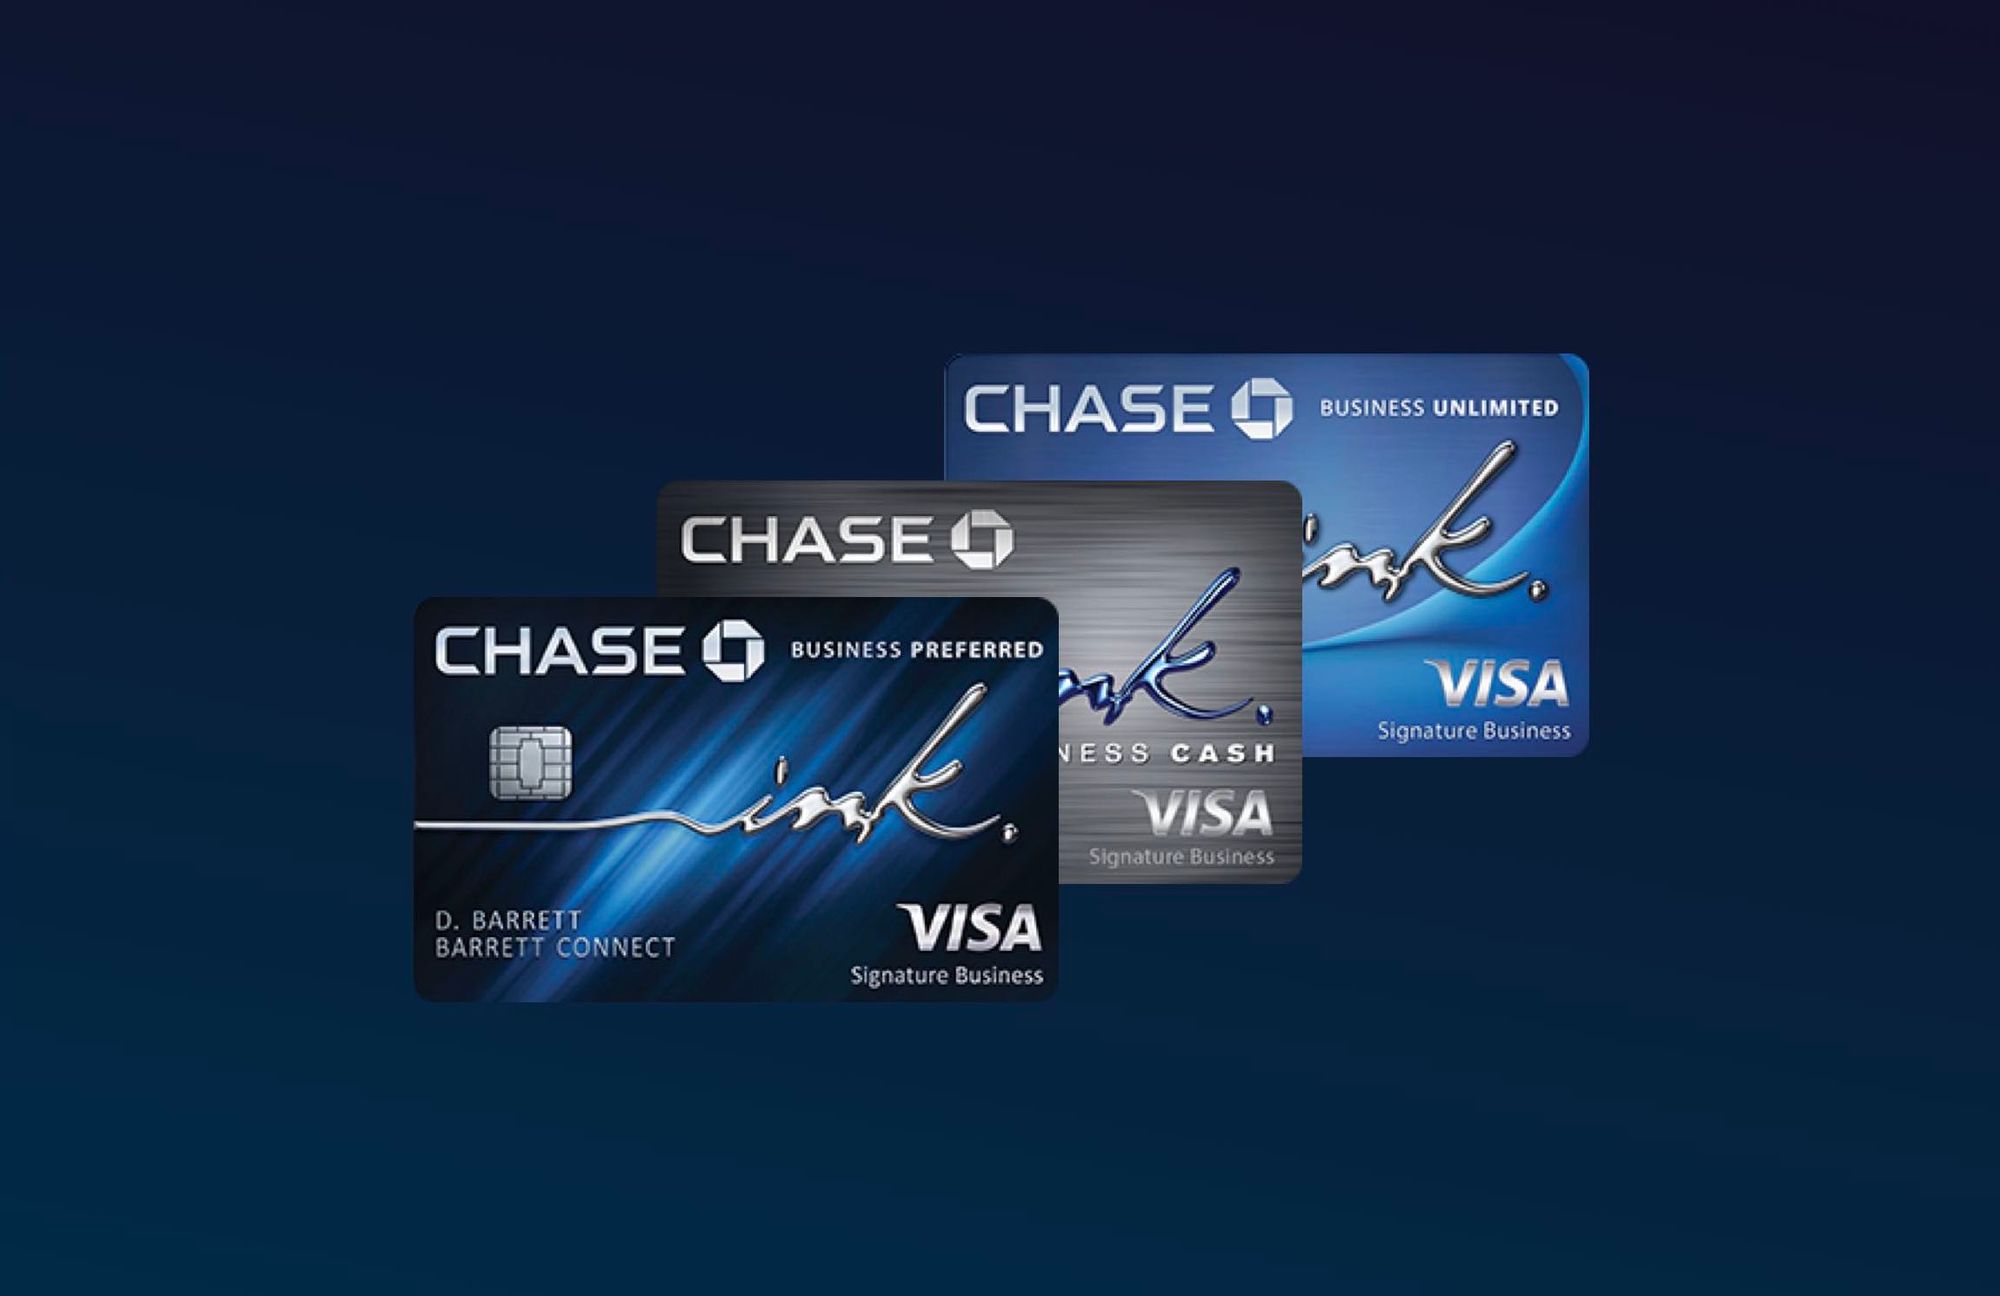 Chase Ink Best Business Cards?